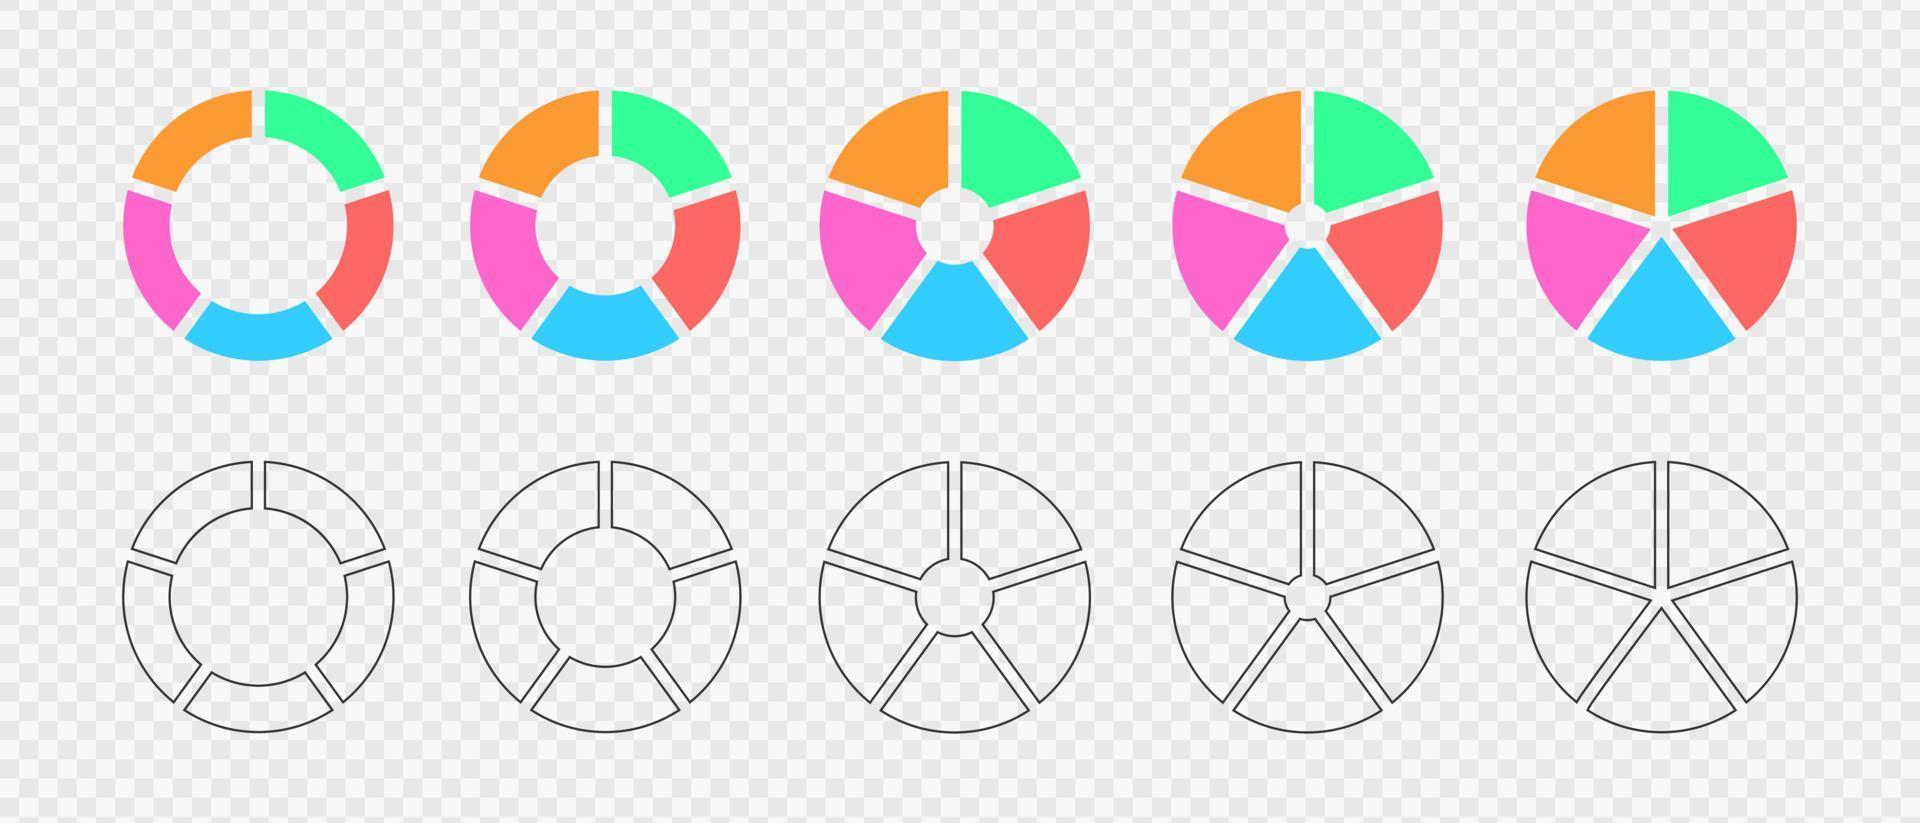 Donut charts. Set of infographic wheels divided in 5 multicolored and graphic sections. Circle diagrams or loading bars. Round shapes cut in five equal parts vector